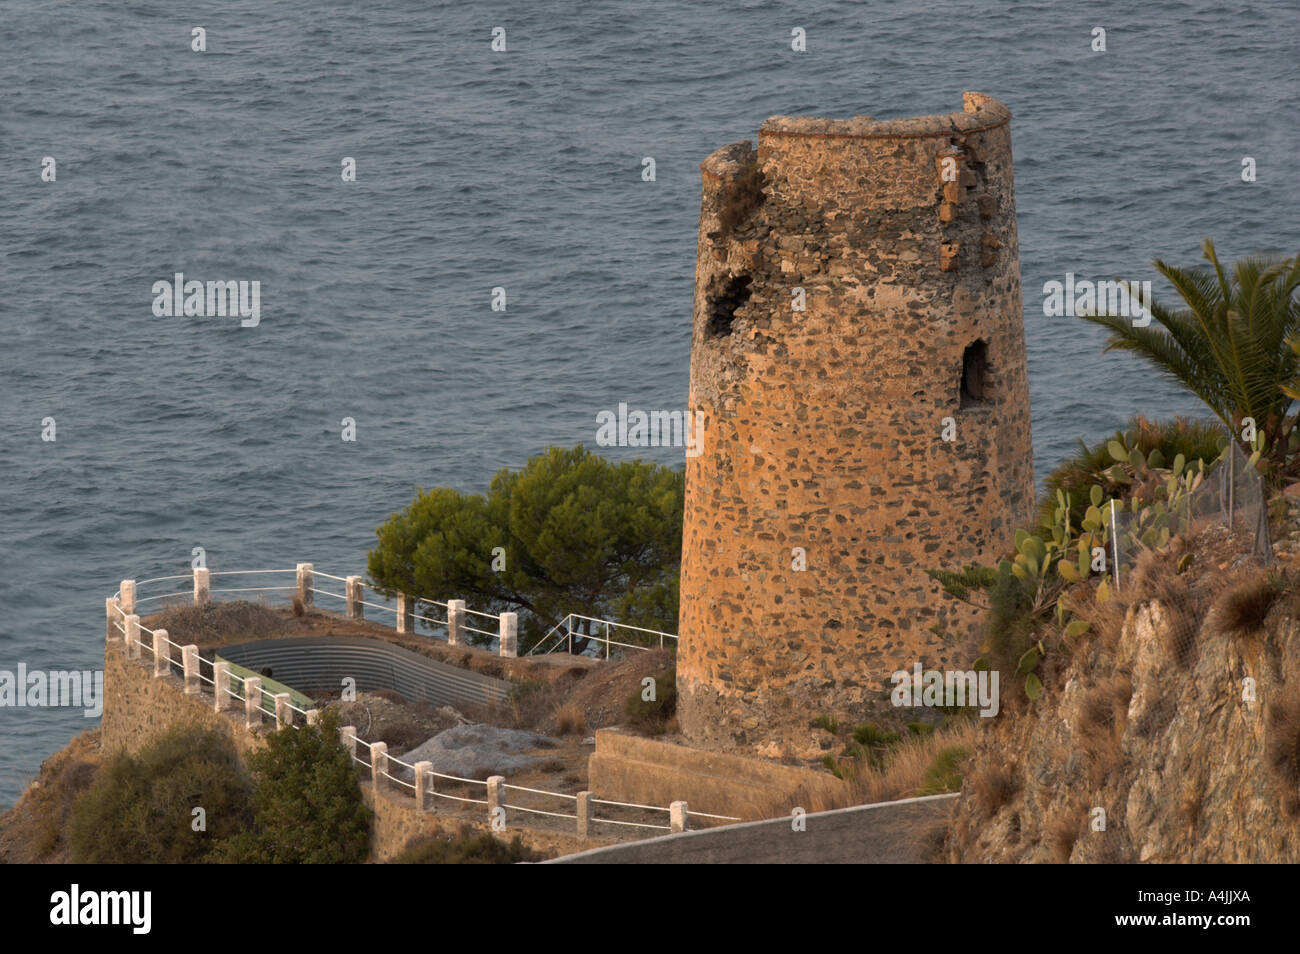 Middle age watchtower in the seashore for Mauresque attacks surveillance Nerja Málaga Spain Stock Photo